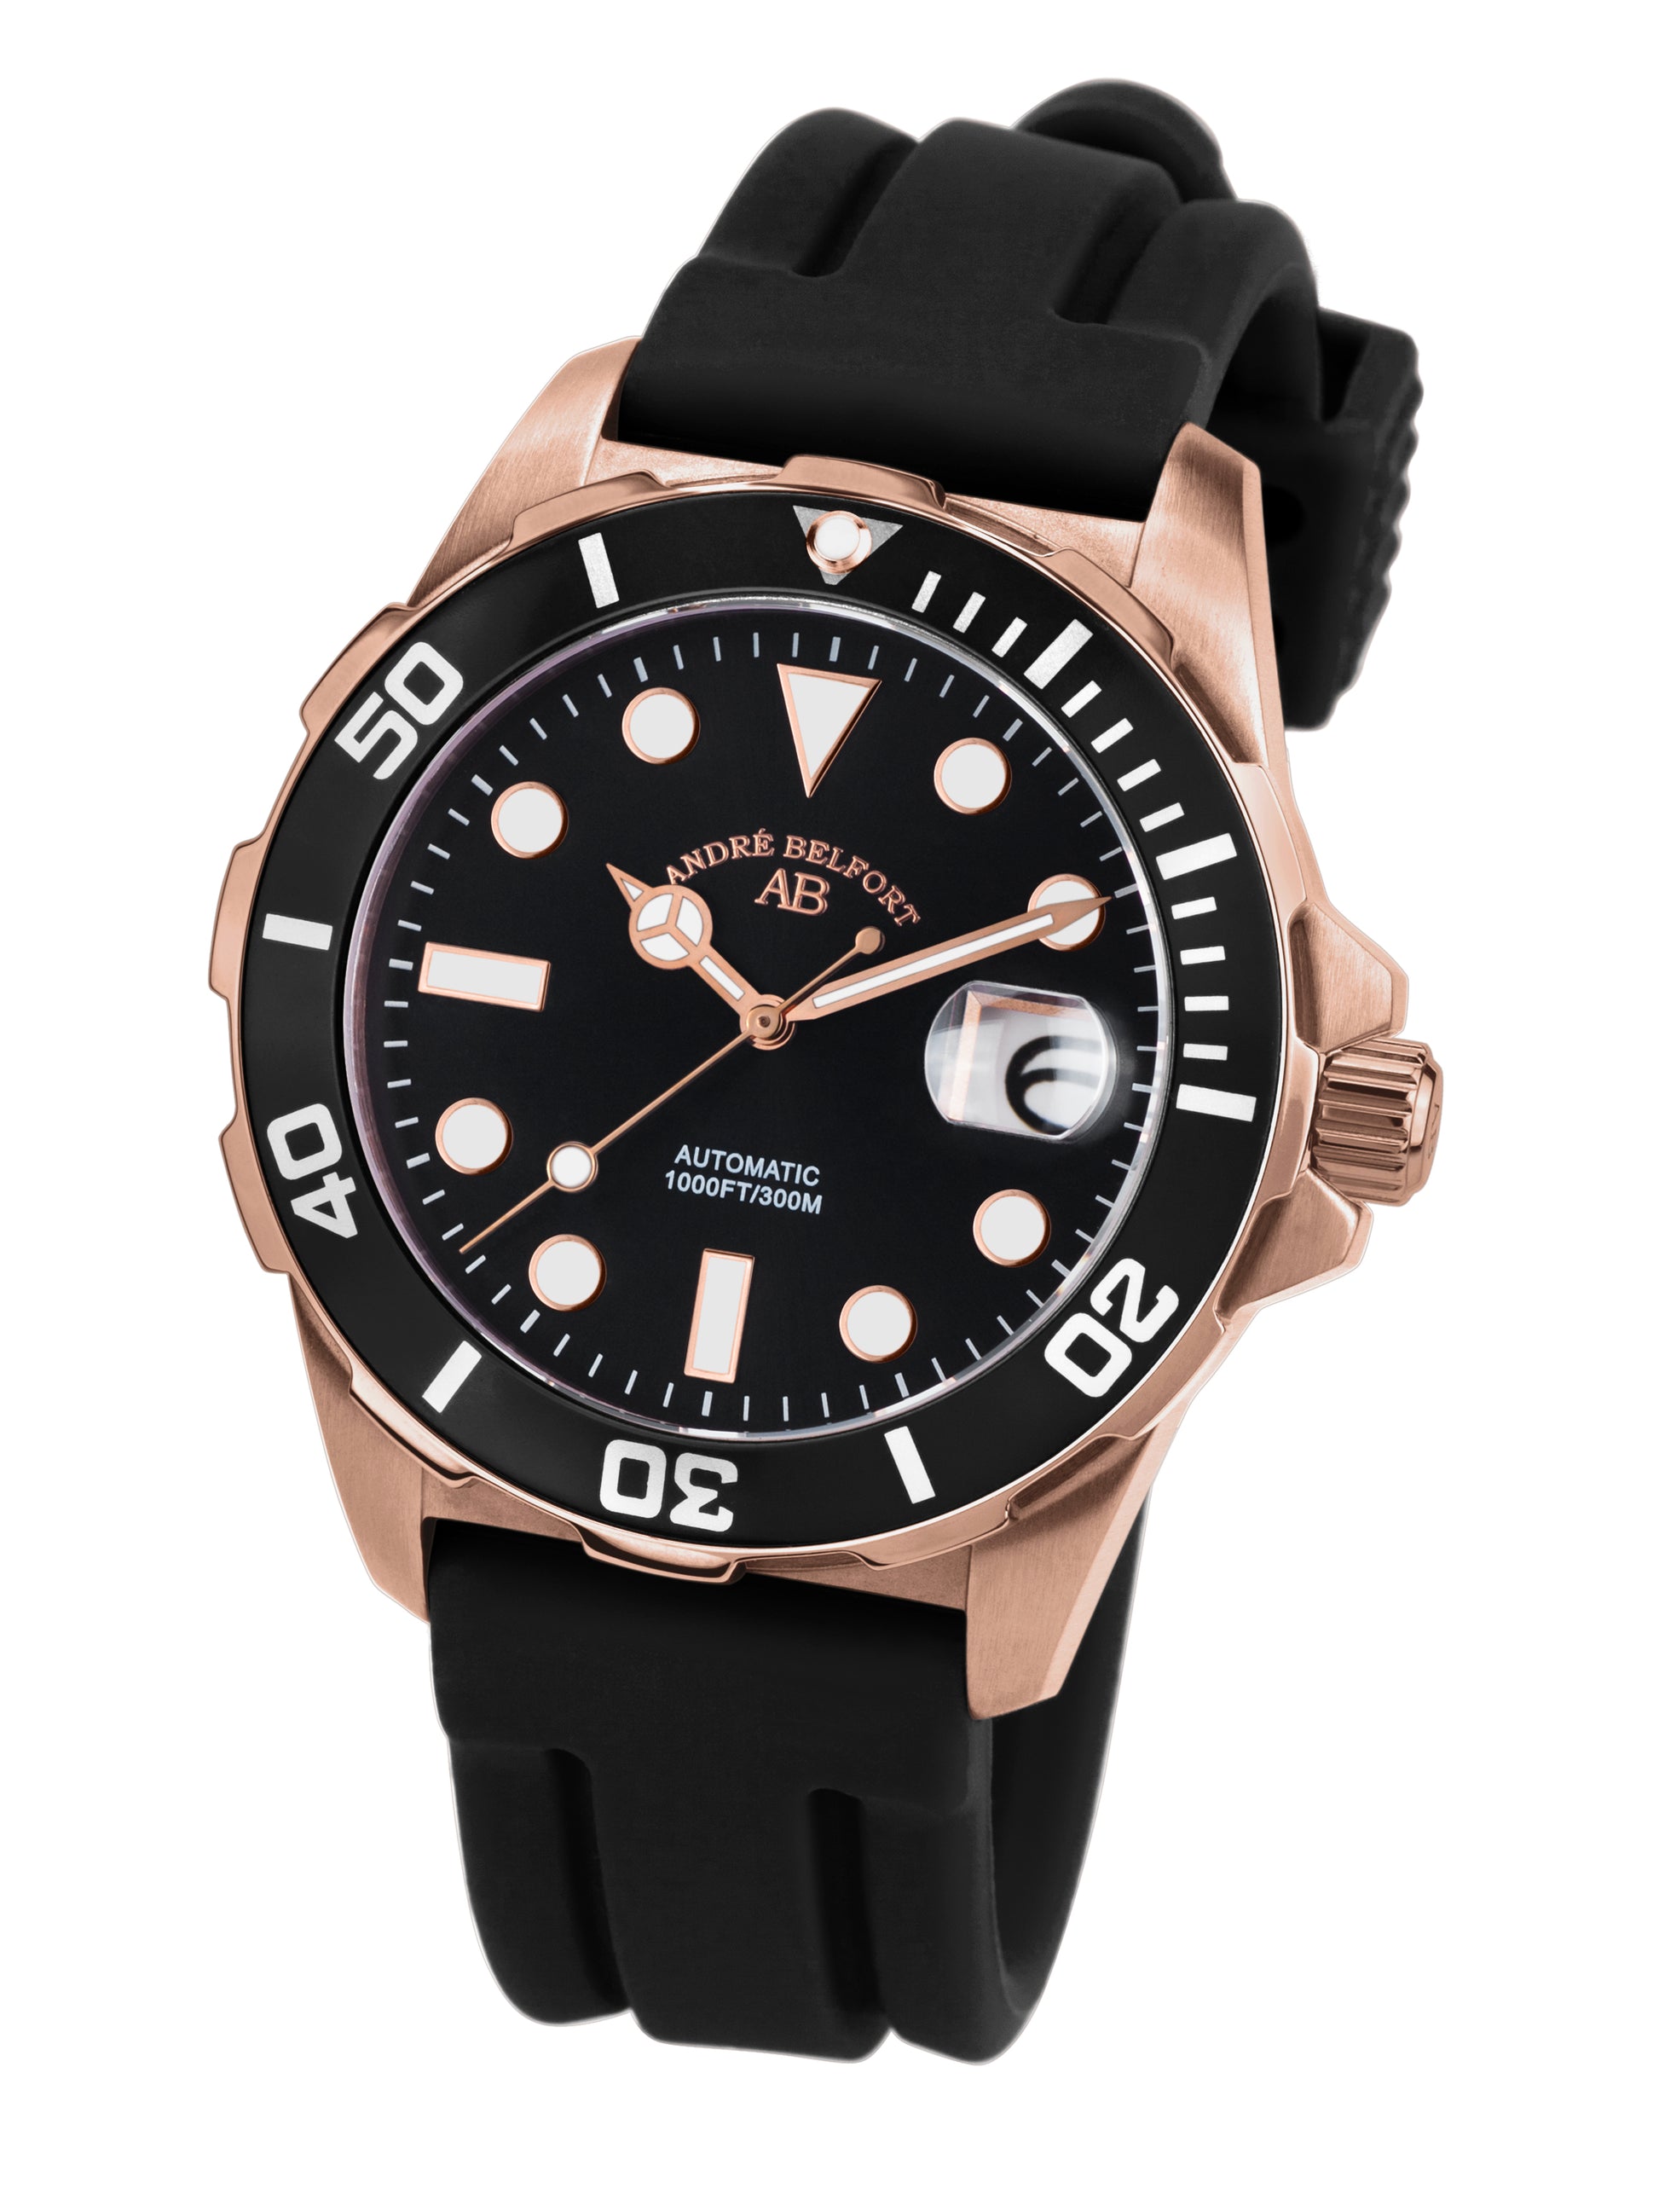 Automatic watches — Sous les mers — André Belfort — rosegold black